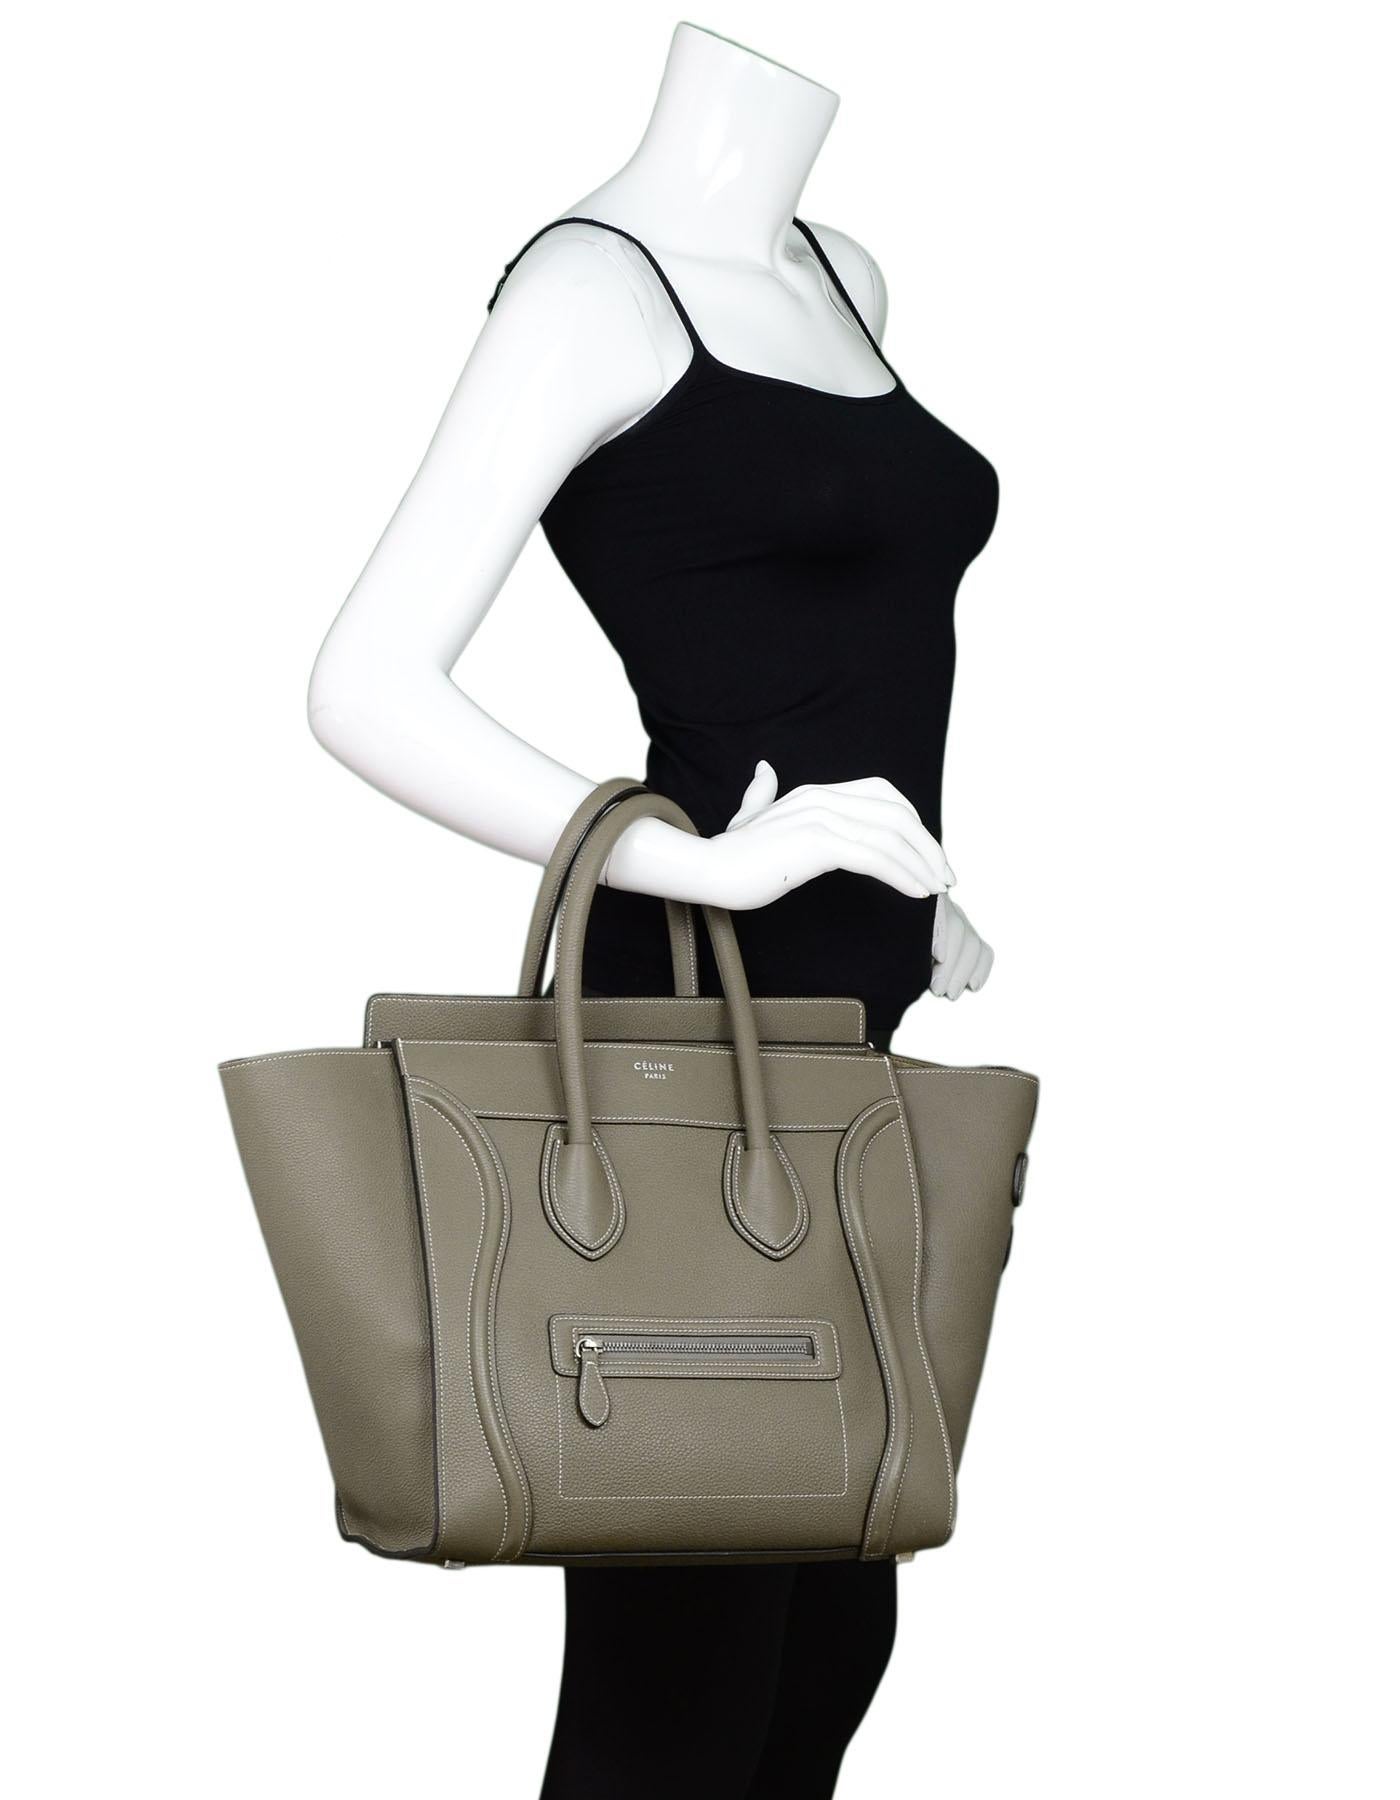 Celine Souris Grey Drummed Calfskin Mini Luggage Tote

Made In: Italy
Color: Souris grey
Hardware: Silvertone
Materials: Leather, metal
Lining: Grey suede
Closure/Opening: Zip top closure
Exterior Pockets: Front zip pocket
Interior Pockets: One zip